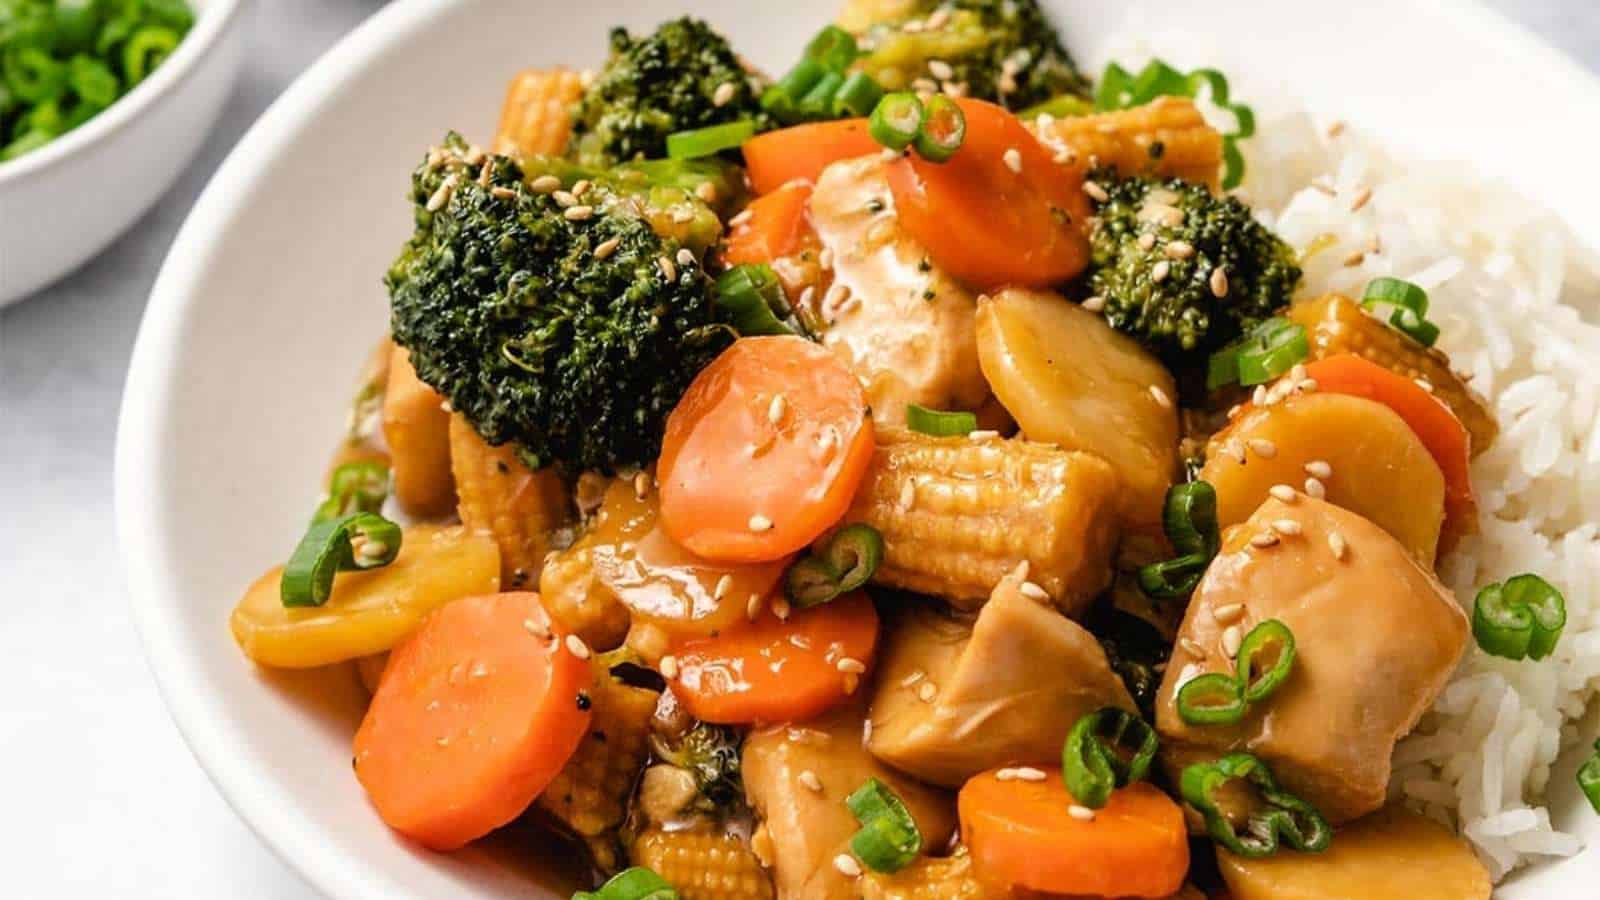 A bowl of asian stir fry with broccoli and carrots.